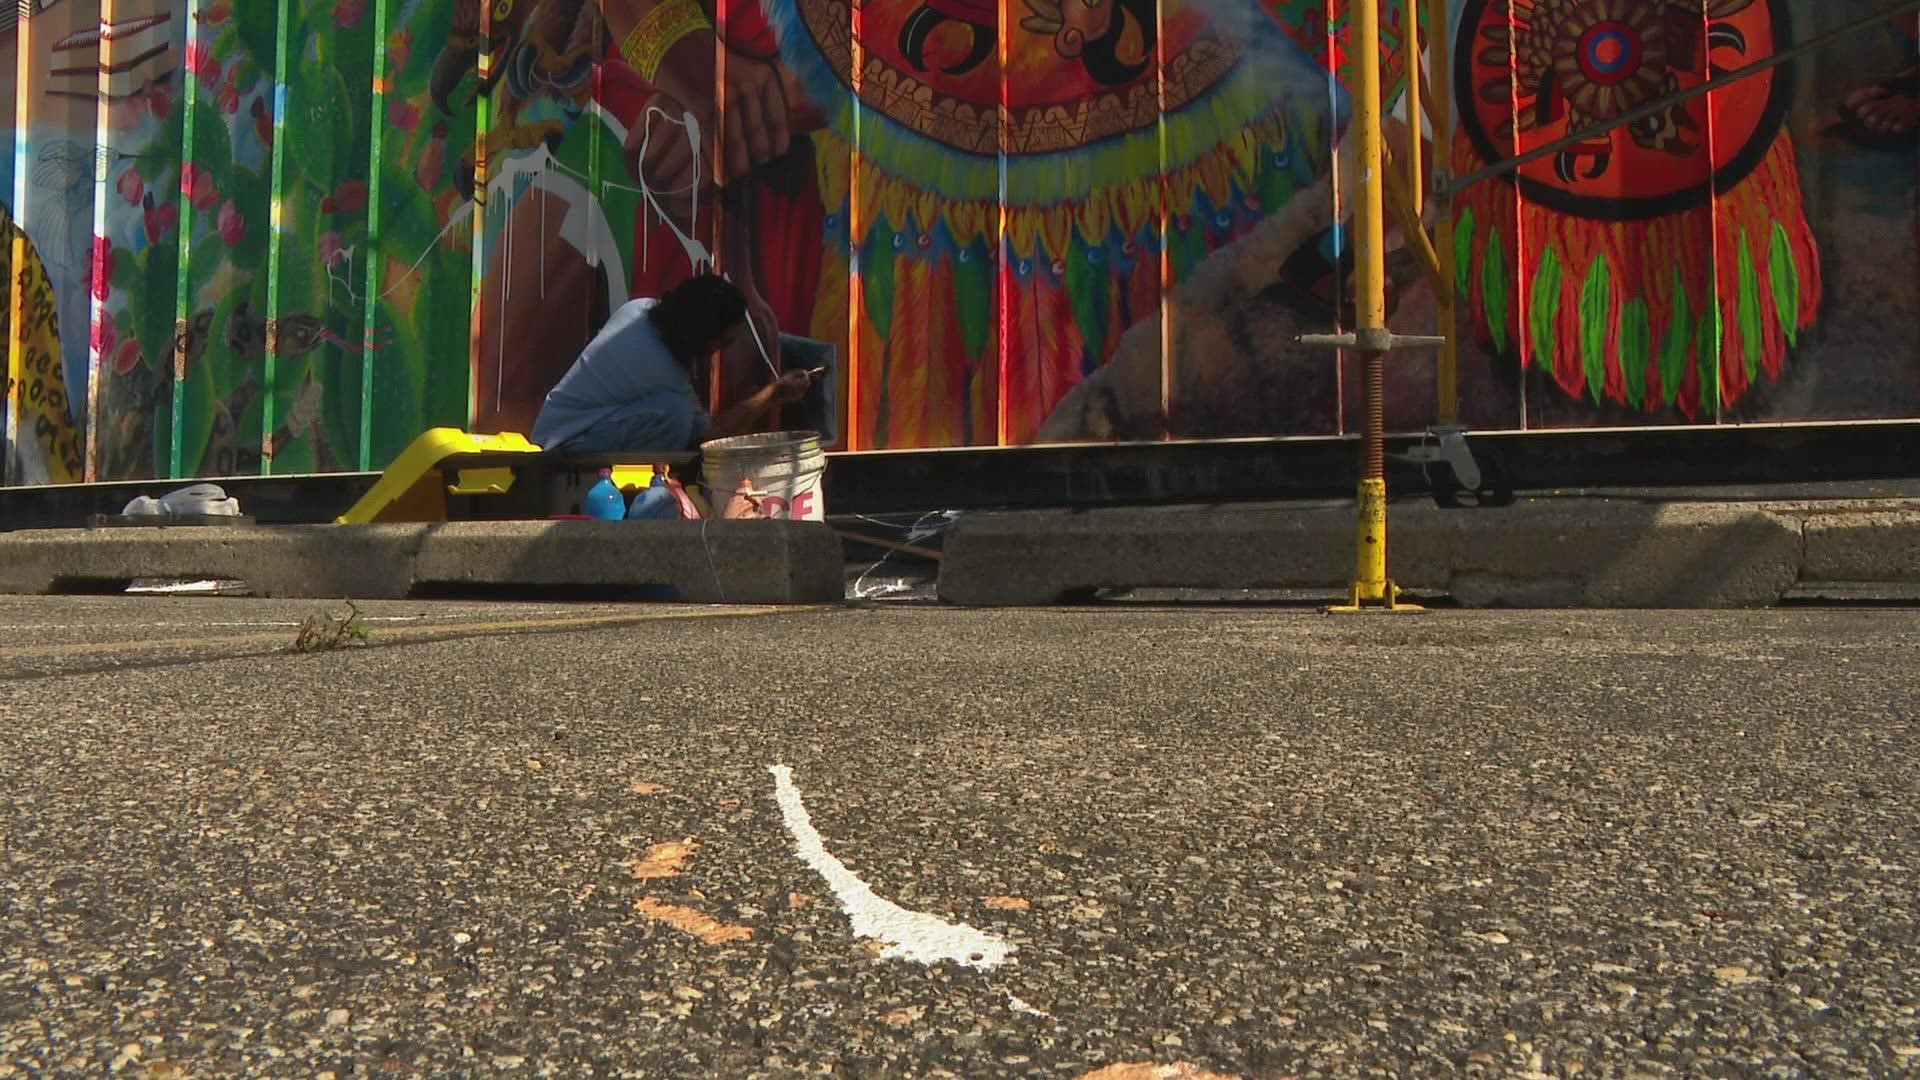 Artist Arturo Morales Romero predicts it will take him an additional 30 hours to fix the vandalism.